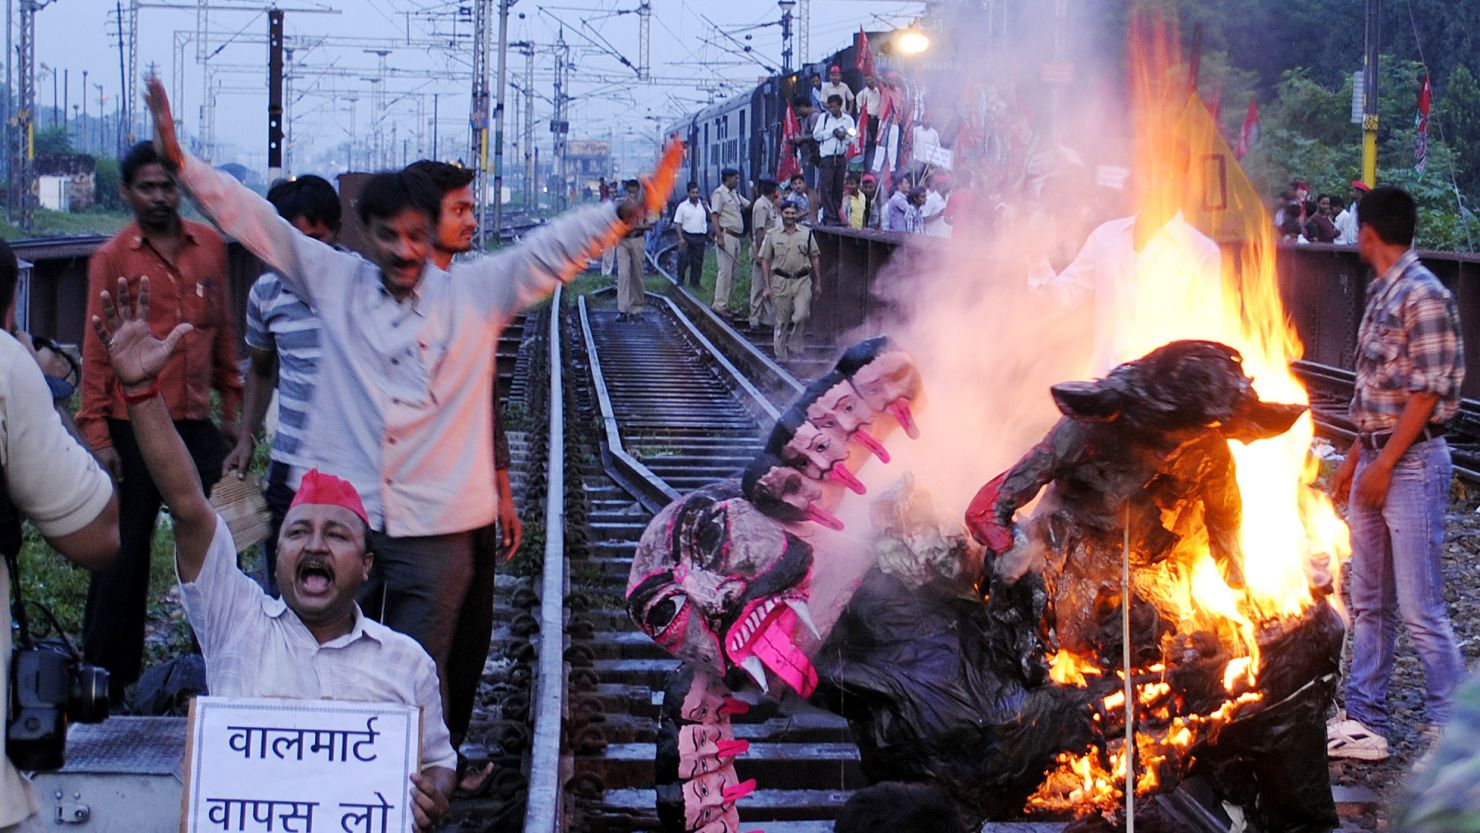 Samajwadi Party workers stop a train in Allahabad on September 20, 2012 in protest at the government's retail reforms.